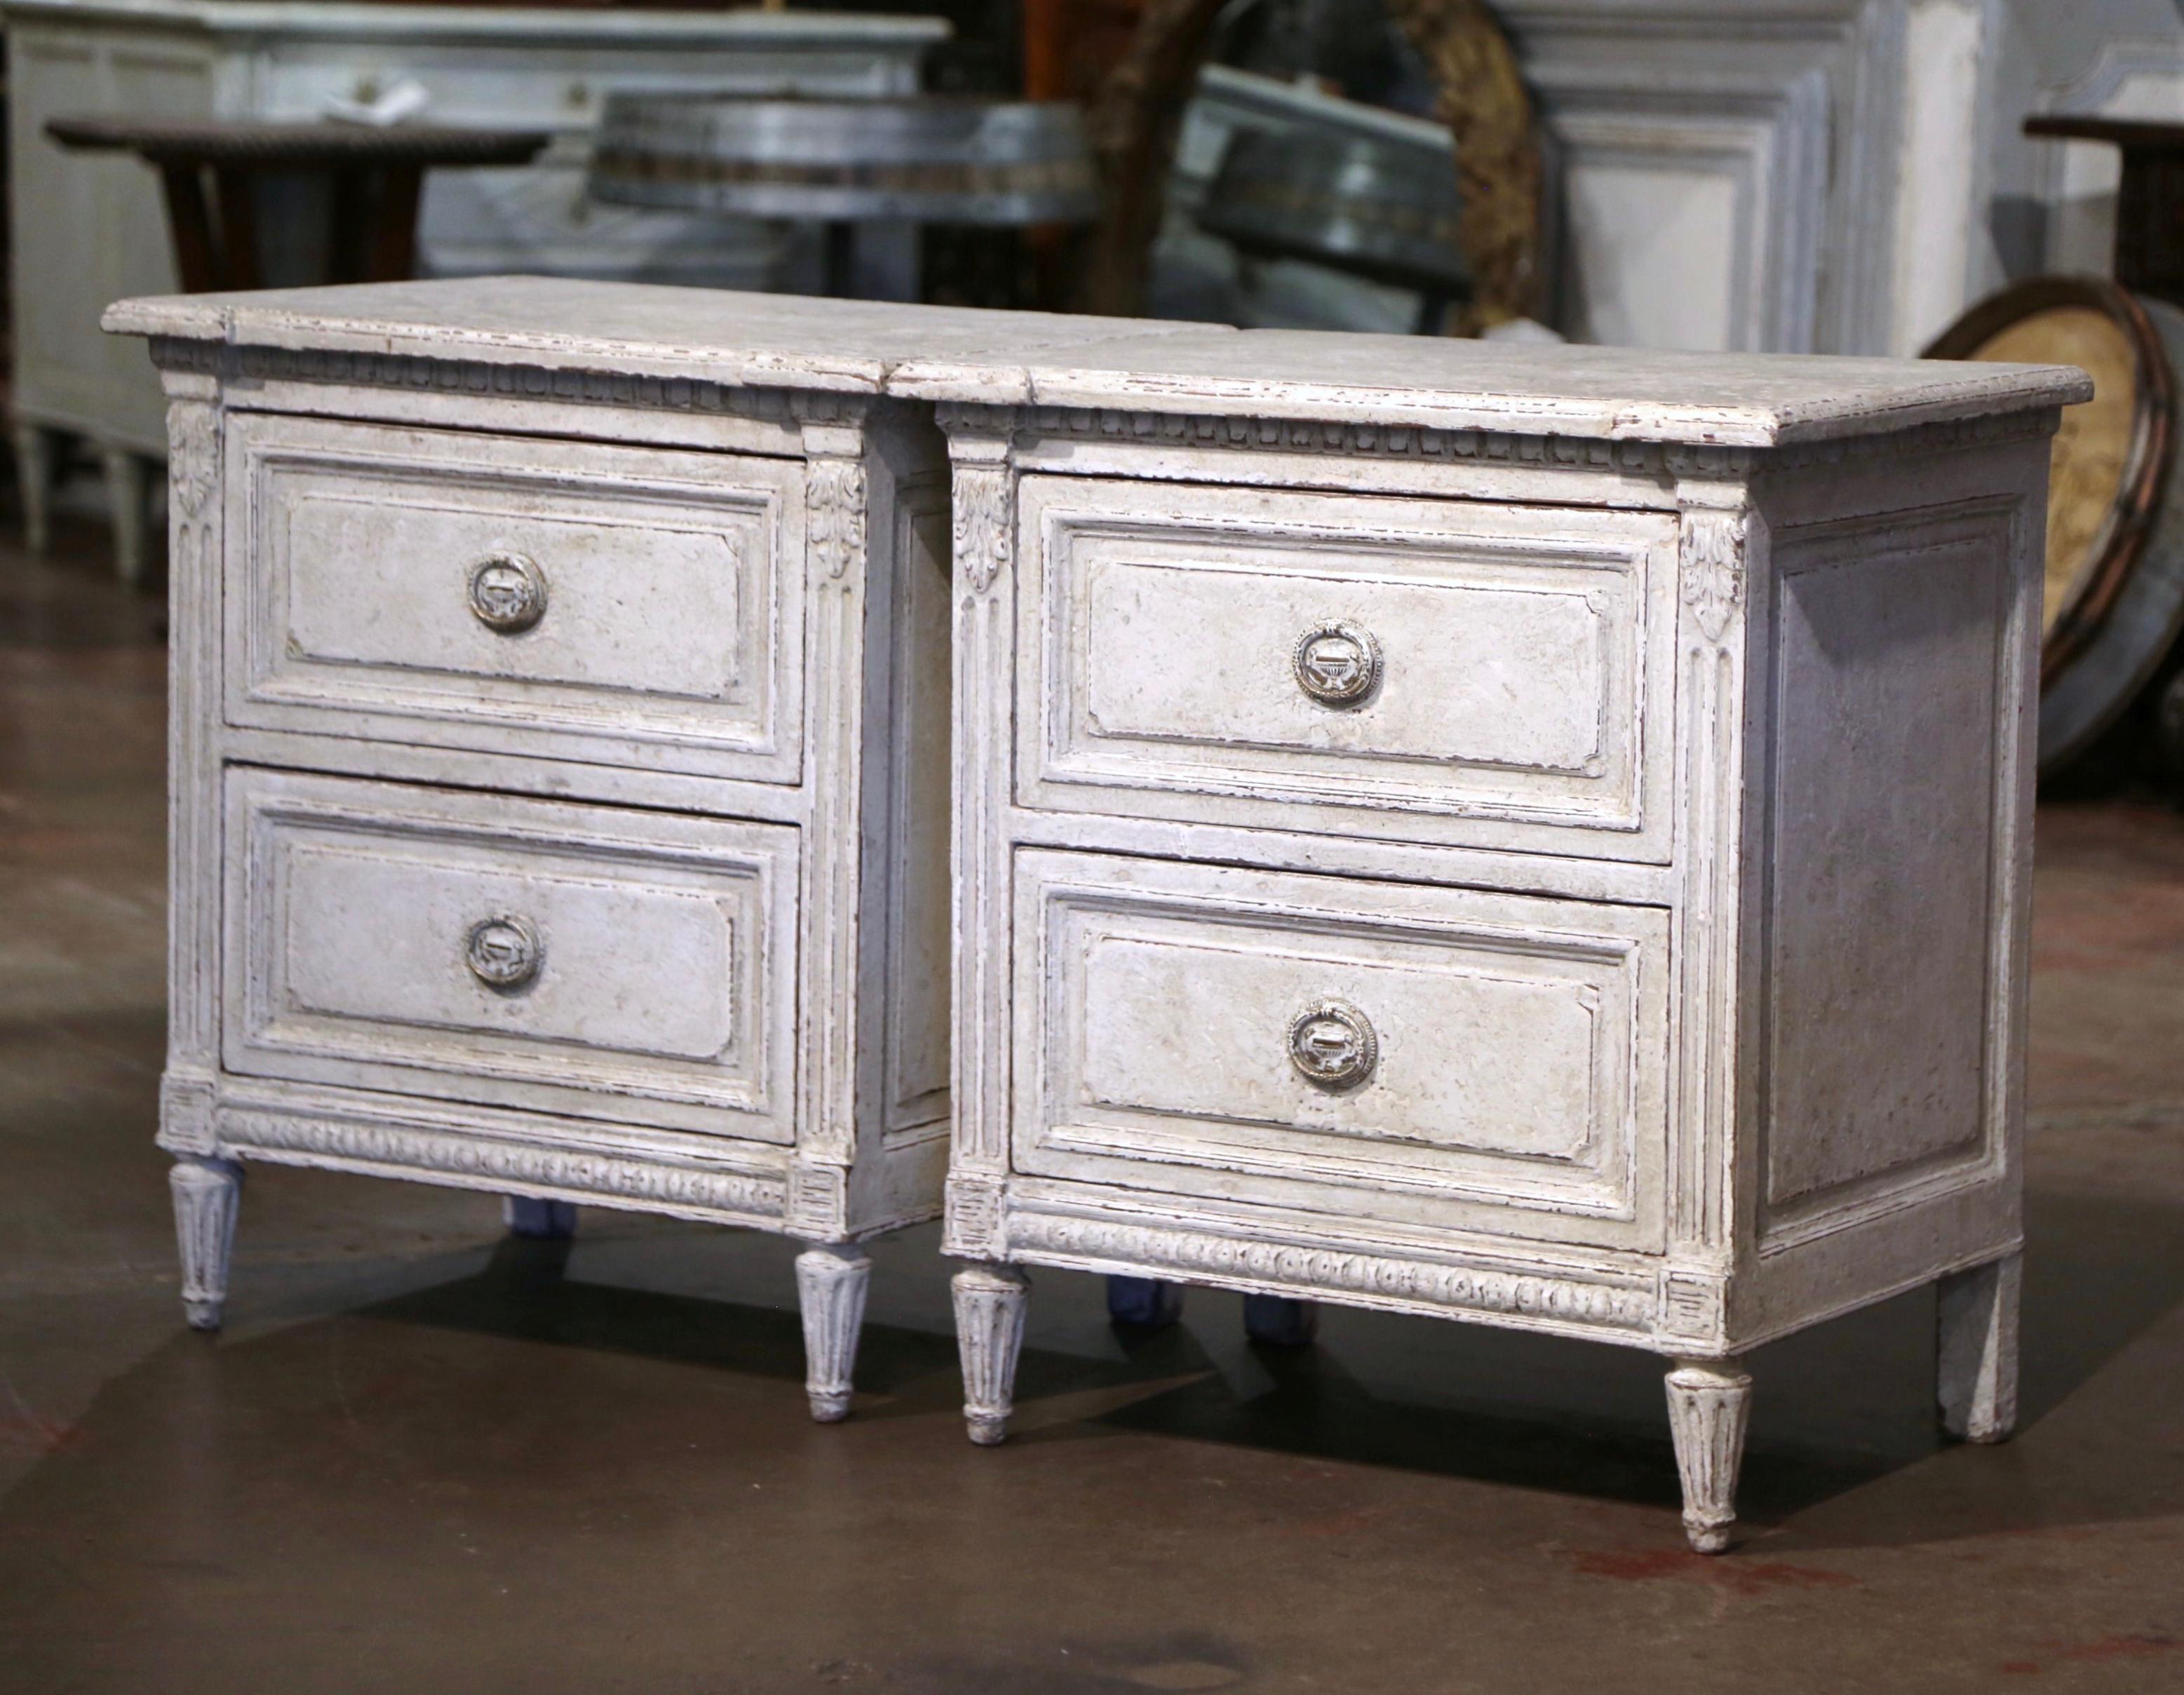 Complete your bedroom with this elegant pair of antique painted bedside cabinets. Crafted in France circa 1880, each commode stands on tapered and fluted legs over a carved plinth apron. The chest with side spline columns and acanthus leaf motifs,